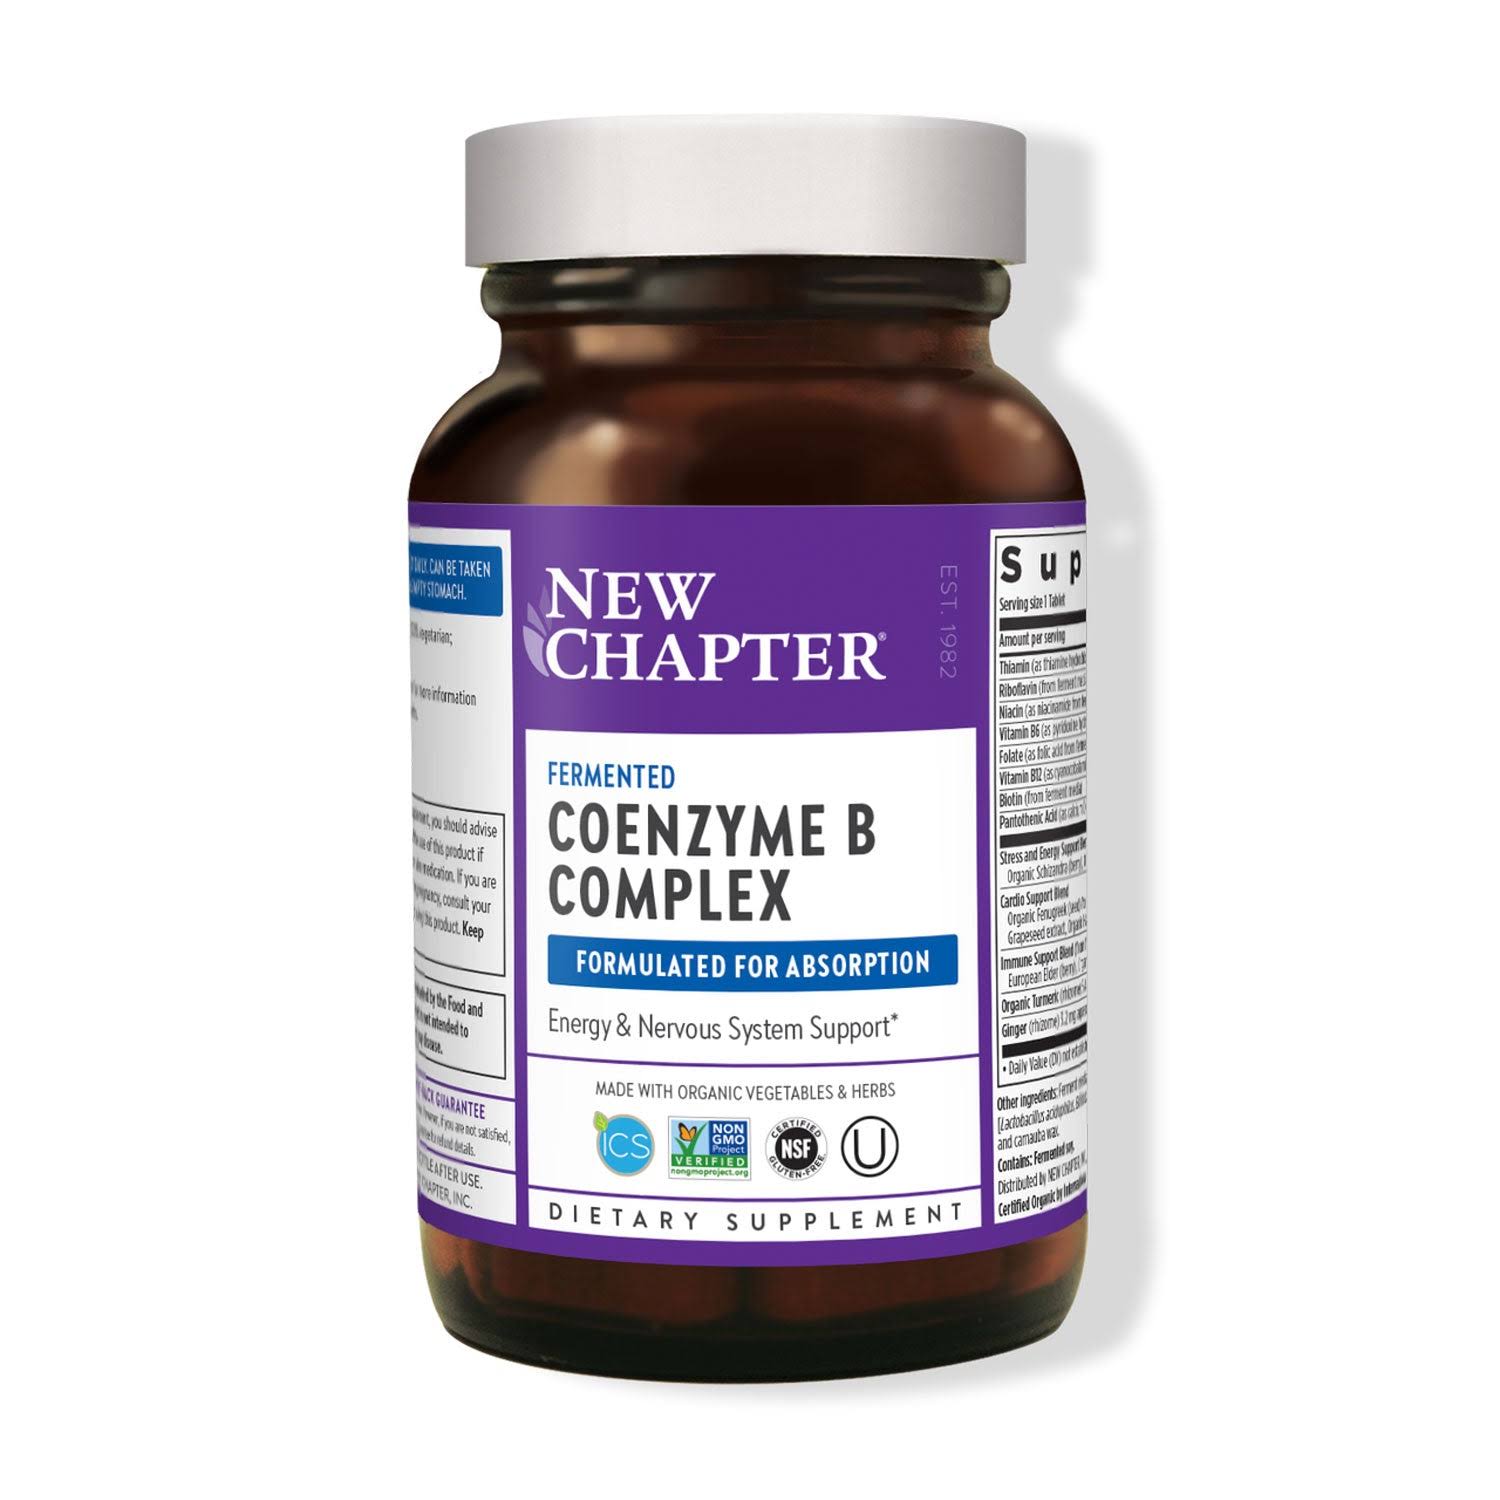 New Chapter Vitamin B Complex, with Whole-Food Herbs, Fermented, Vegan Tablets - 30 tablets